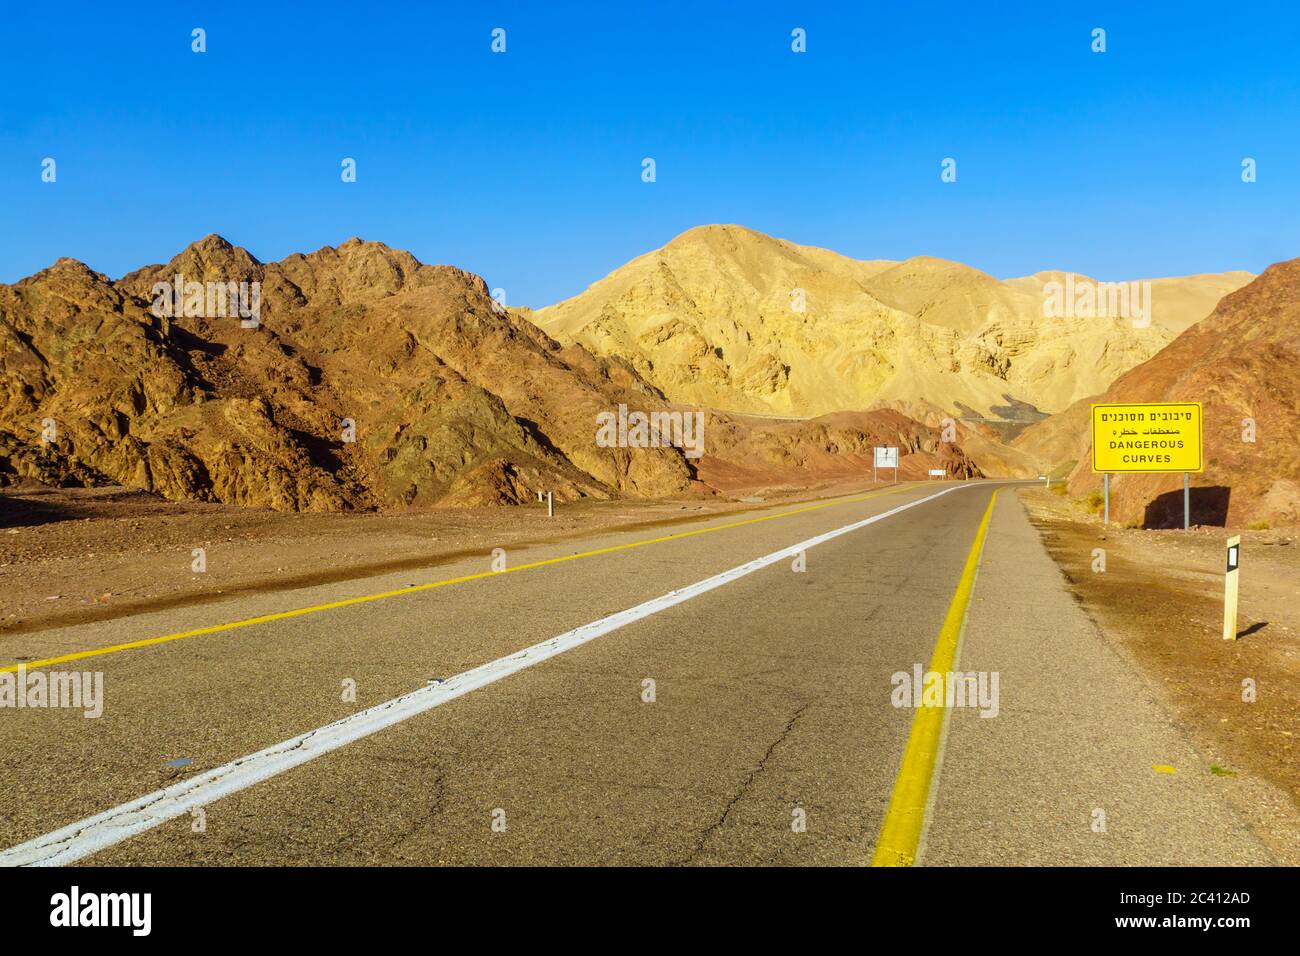 View of desert road 12, with a trilingual warning sign (dangerous curves) and landscape. Eilat mountains, southern Israel Stock Photo